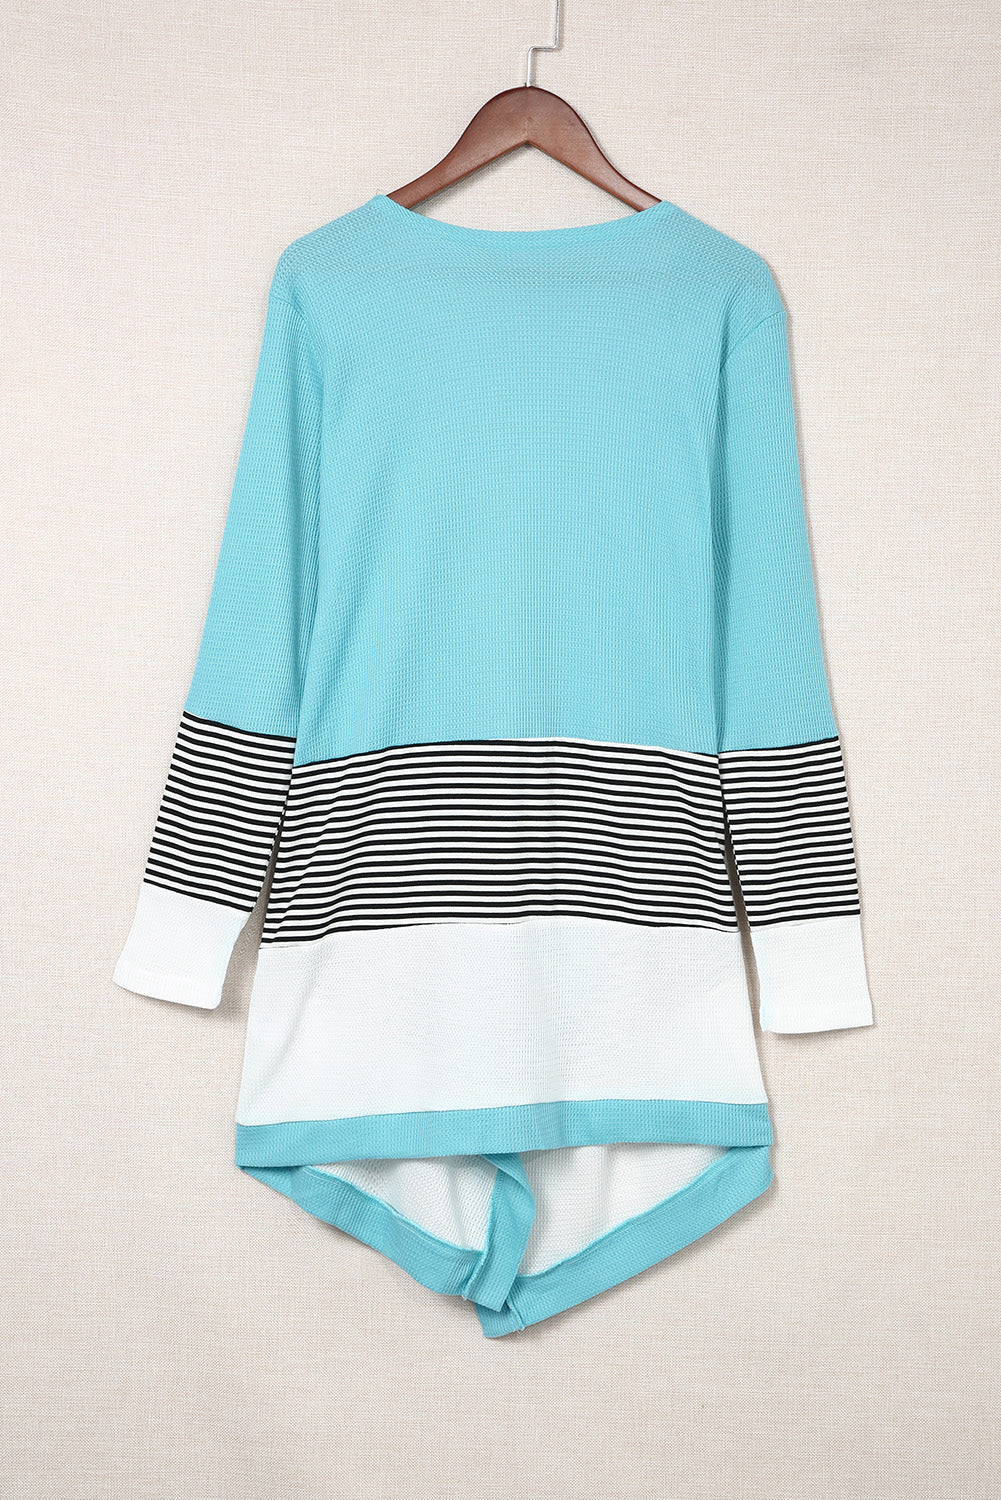 Striped Color Block Open Front Cardigan - Women’s Clothing & Accessories - Shirts & Tops - 6 - 2024